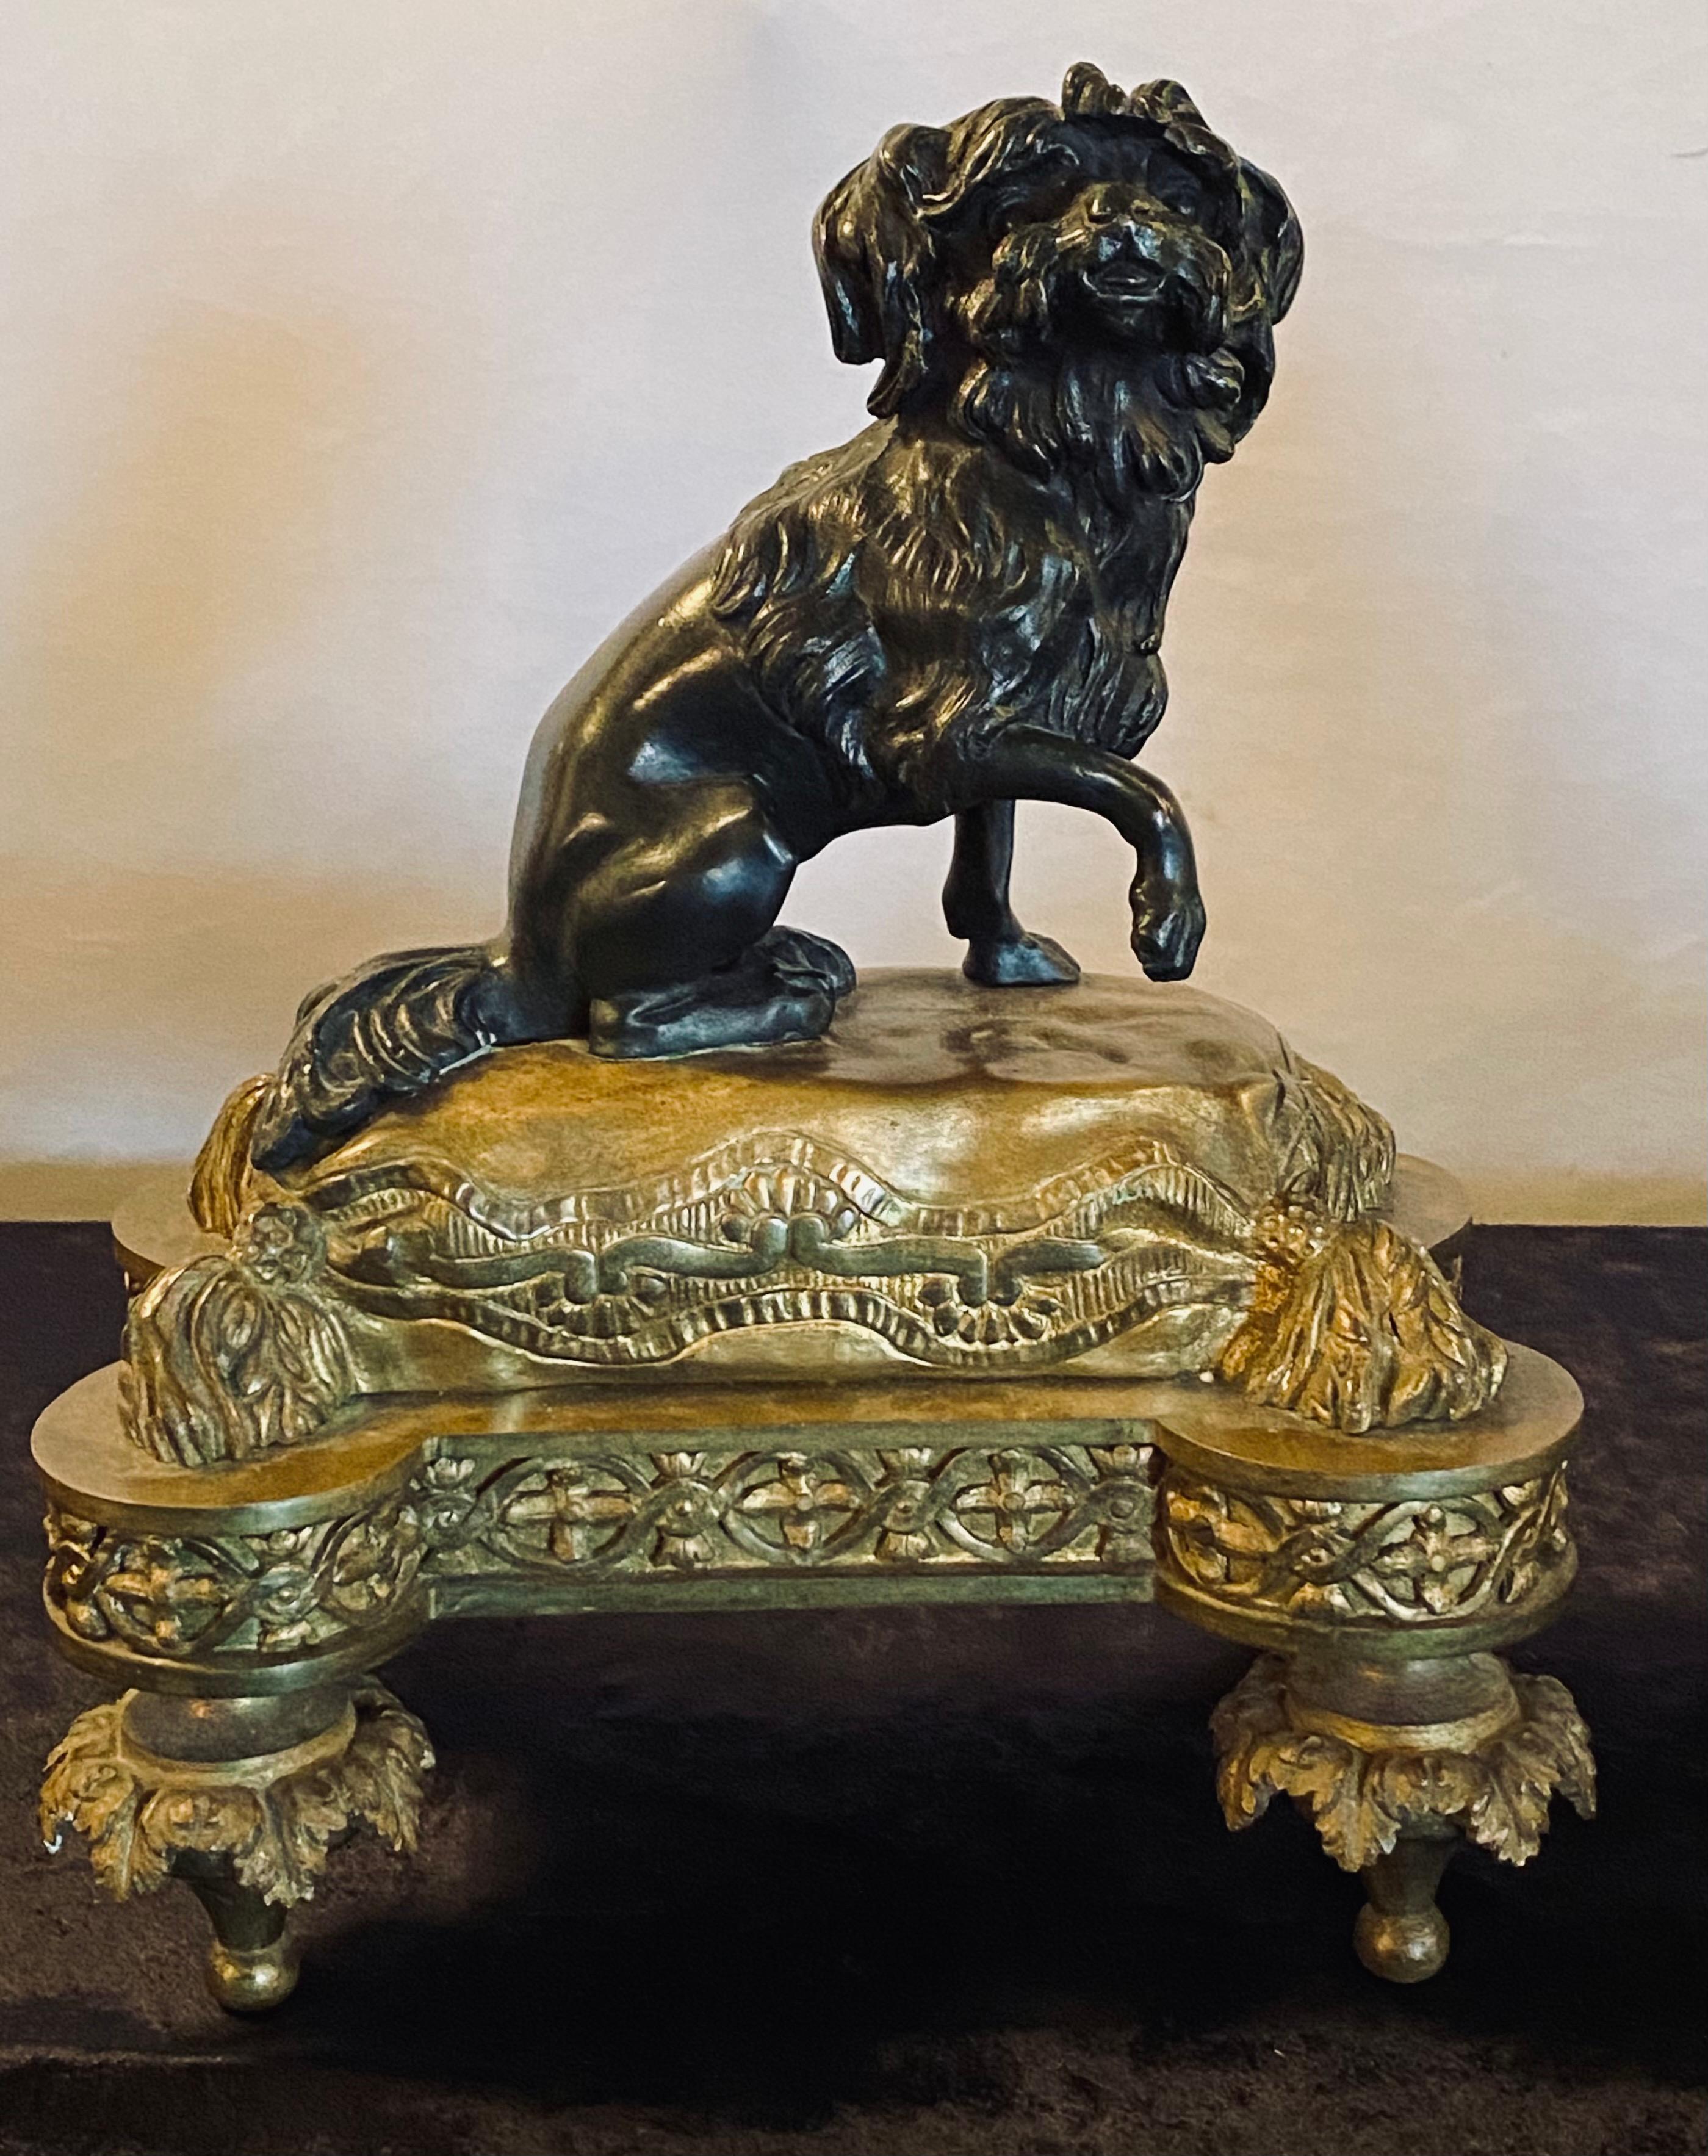 Pair of Louis XVI style 19th century dore bronze chenets. Each having a front facing slightly opposing Poodle wonderfully cast sitting on a gilt tasseled cushion with rounded corners on toupie feet. (description Sothebys NY formally known as Park